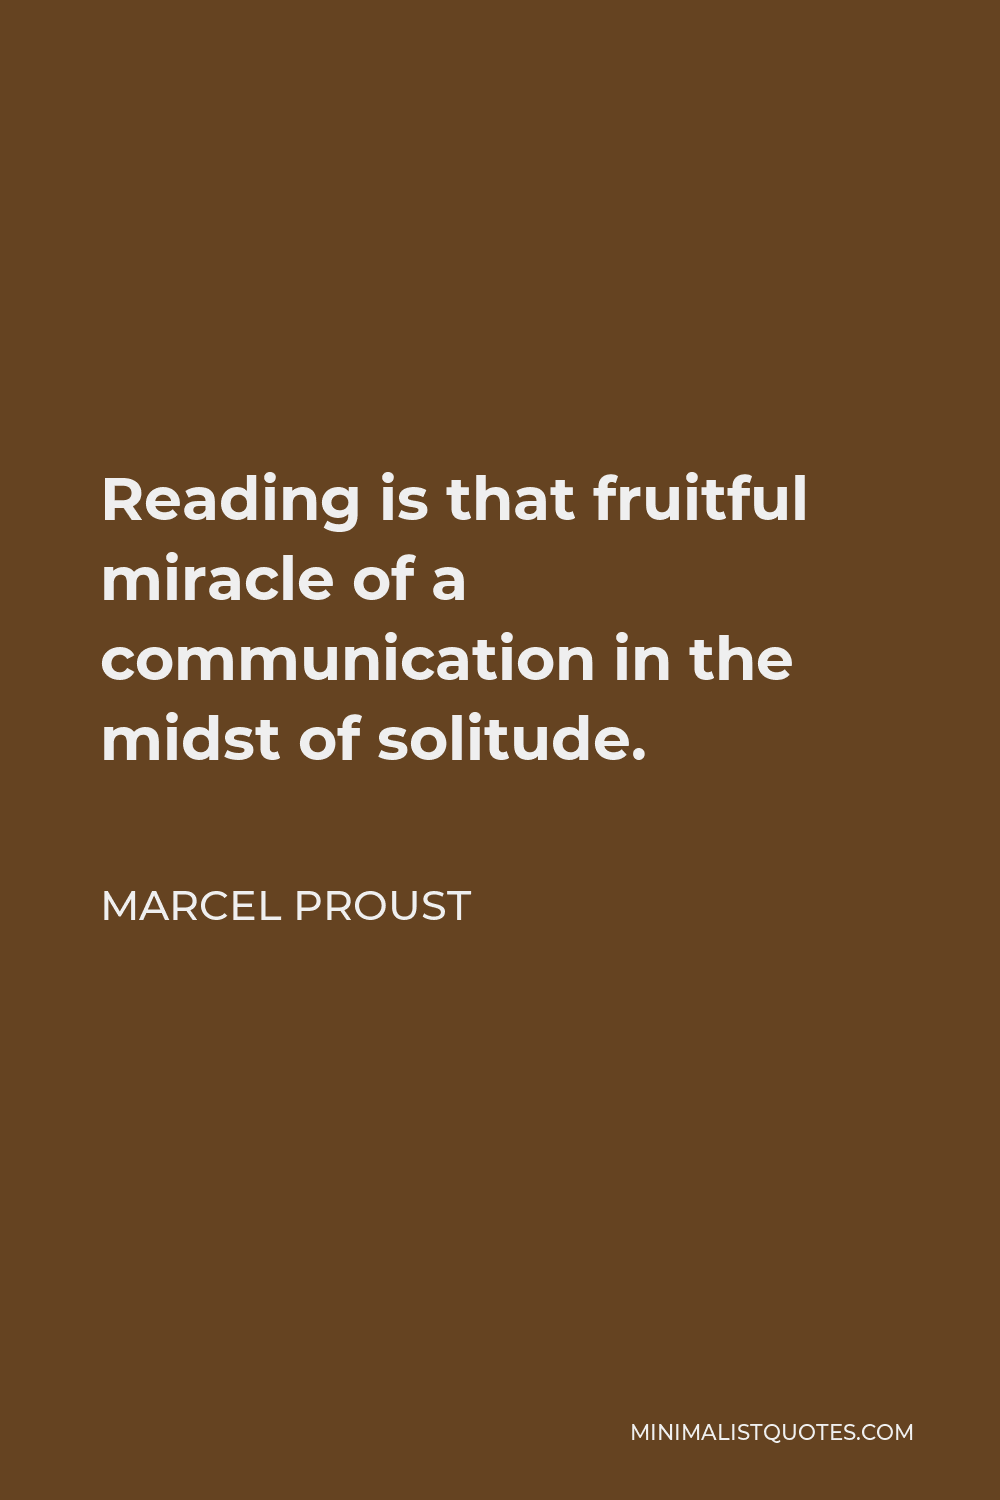 Marcel Proust Quote - Reading is that fruitful miracle of a communication in the midst of solitude.